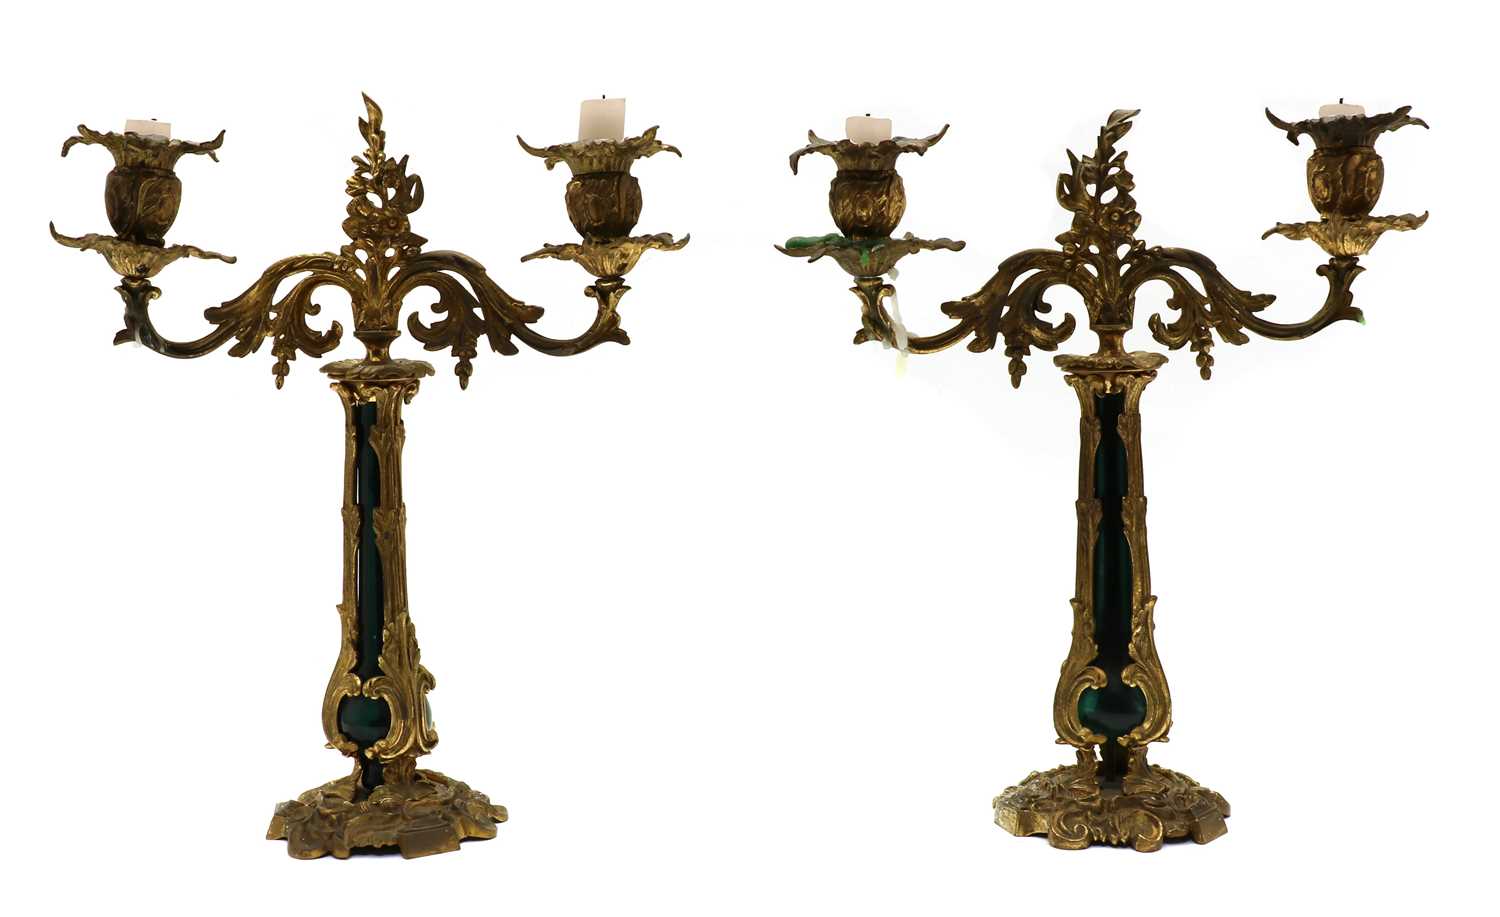 Lot 183 - A pair of 19th century gilt bronze and glass candlesticks